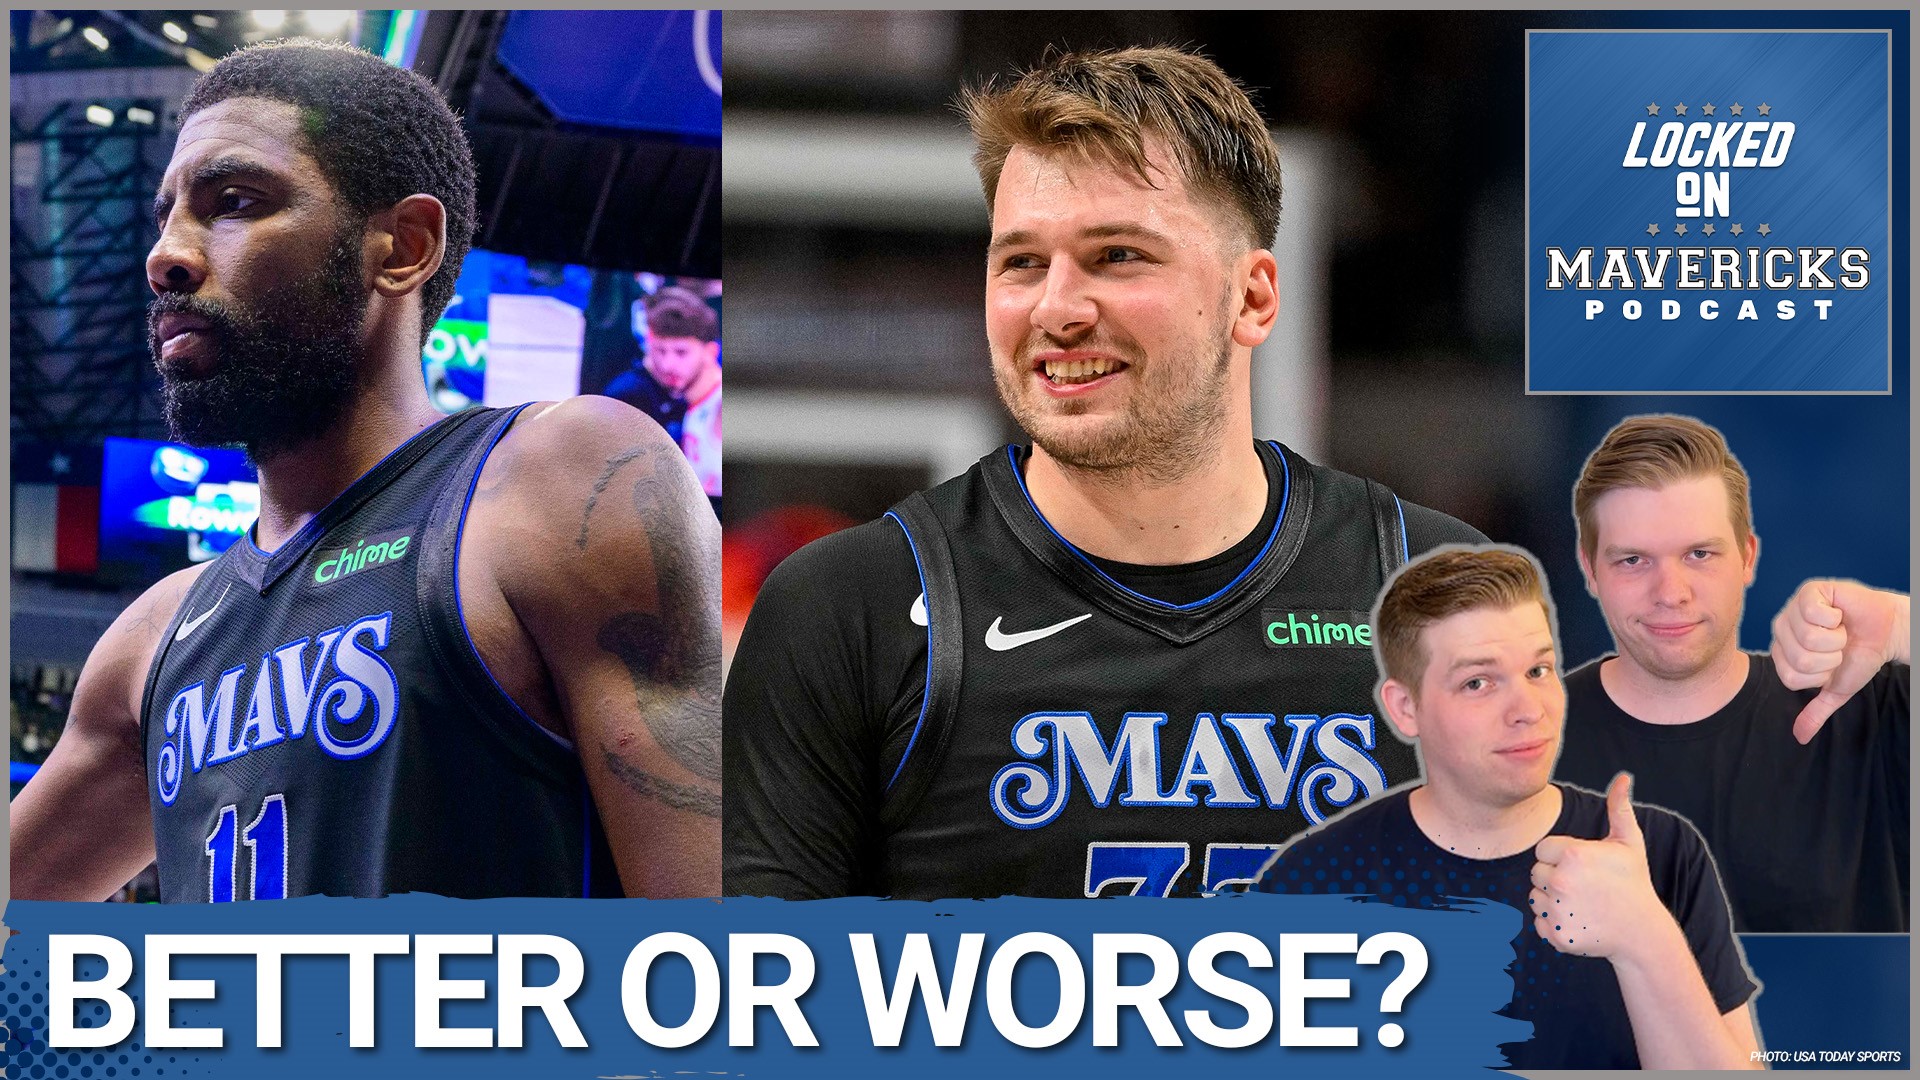 Nick Angstadt & Dana Larson share where Luka Doncic, Kyrie Irving, and the Dallas Mavericks have been better or worse than they expected.